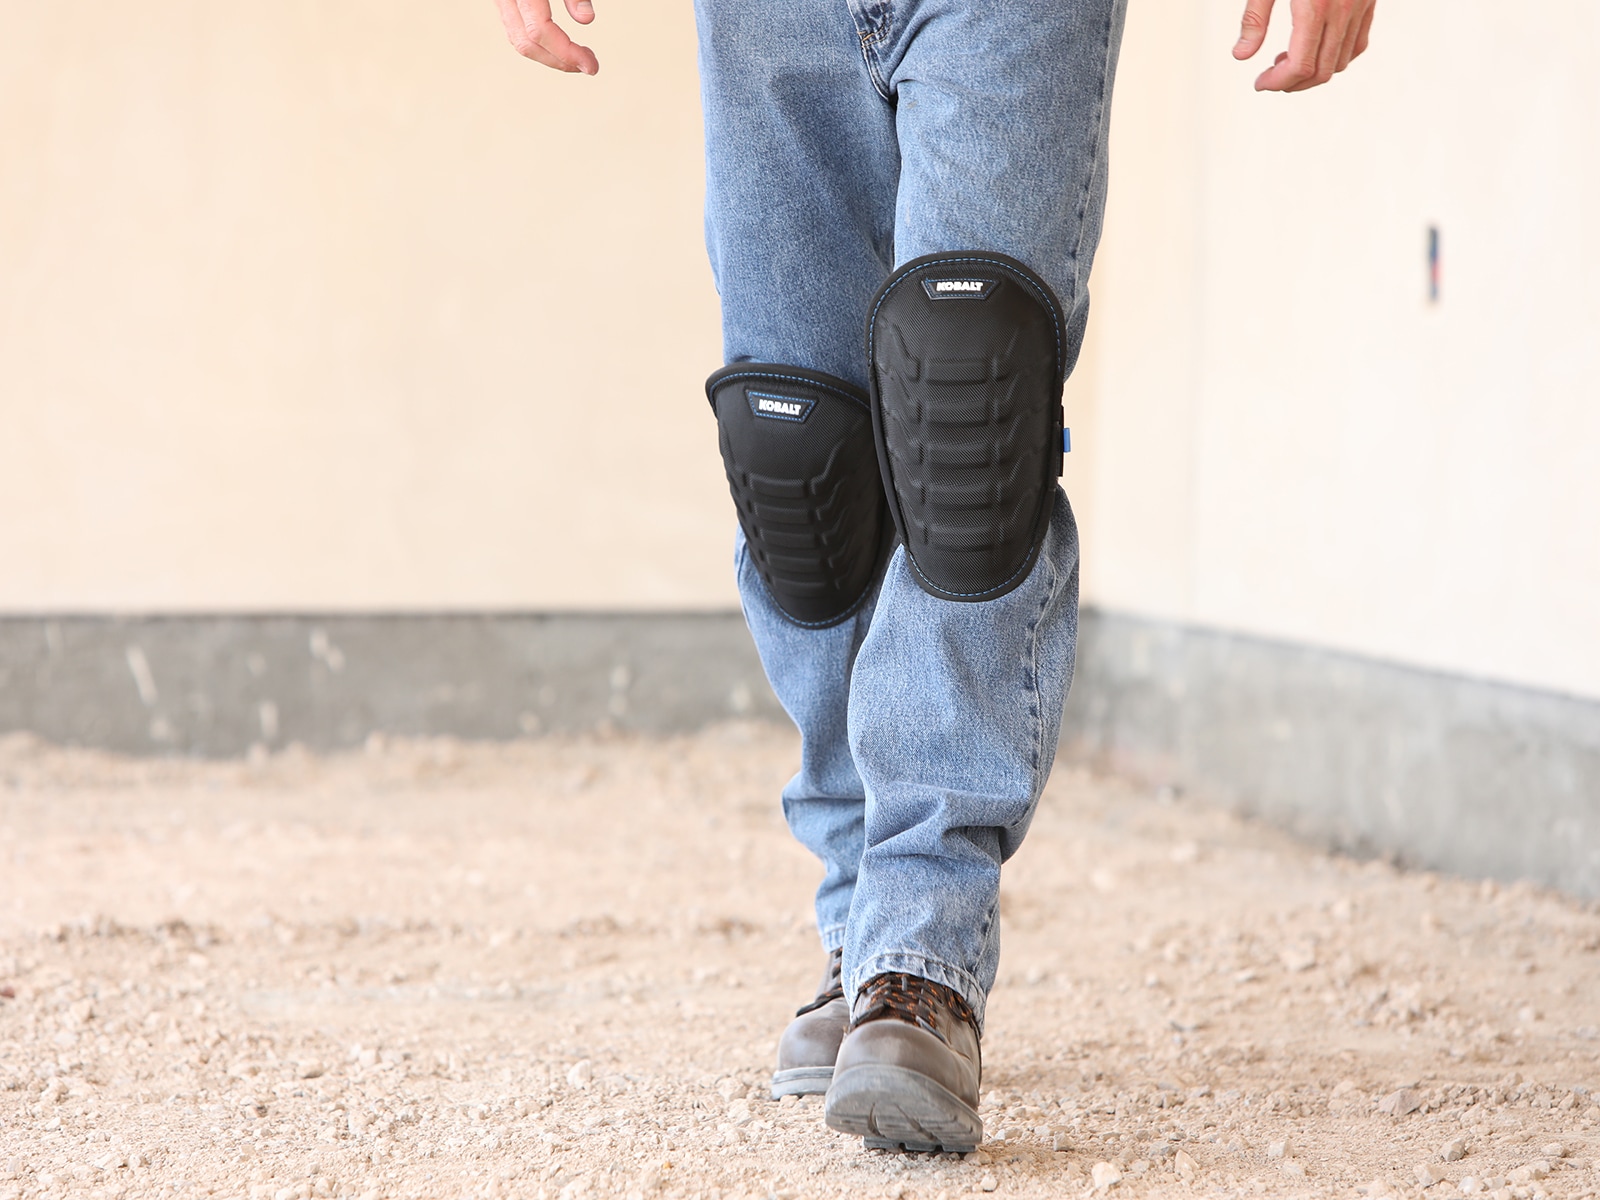 Kobalt Tactical Knee Pads in the Knee Pads department at